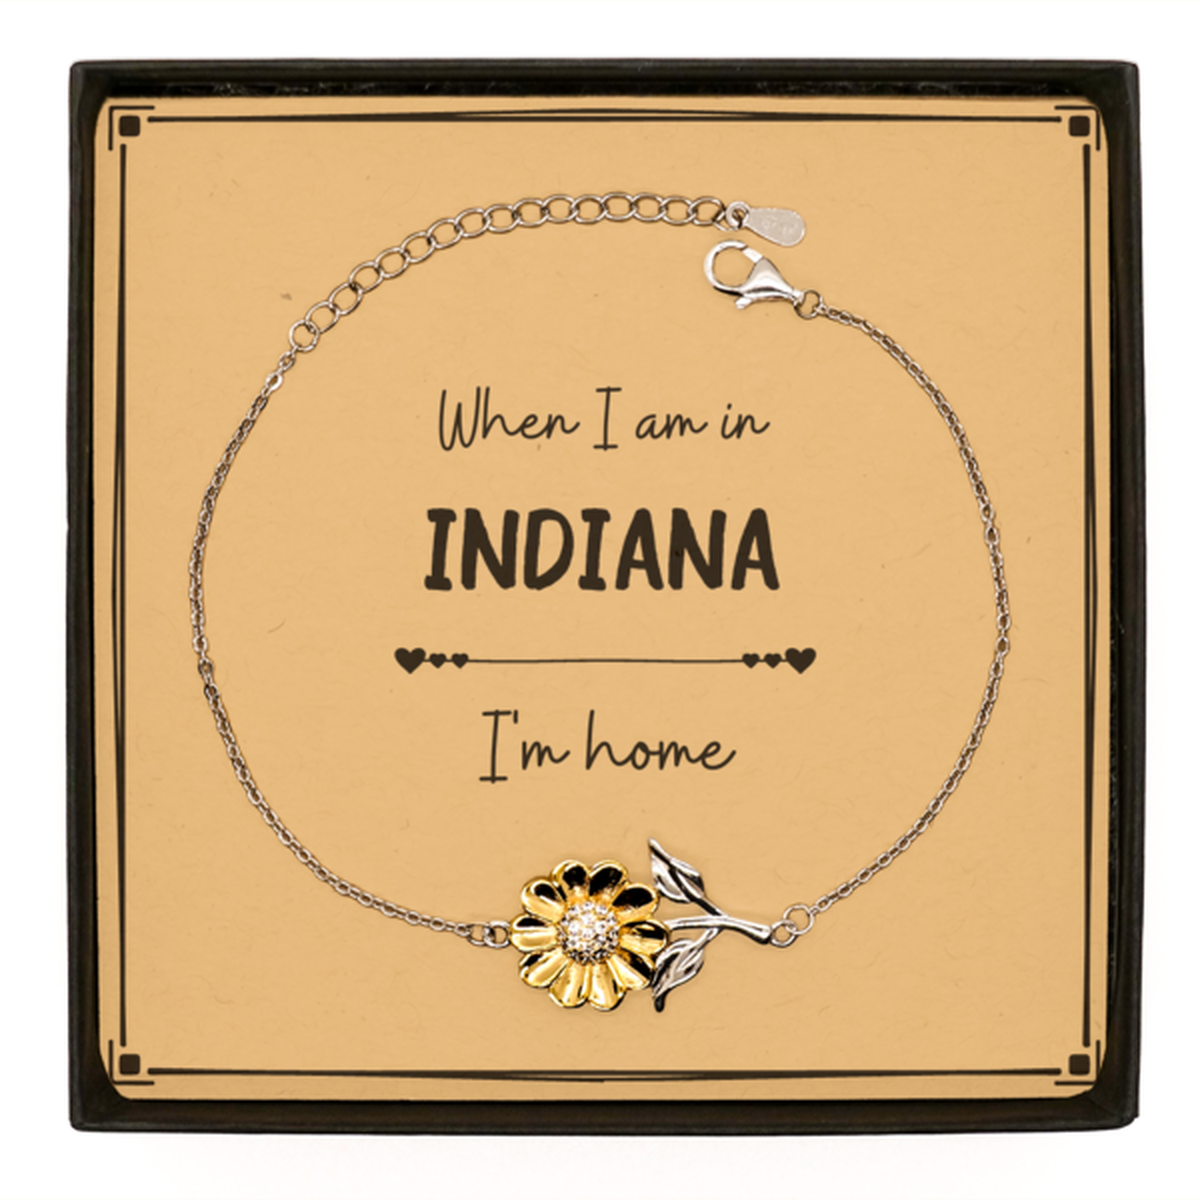 When I am in Indiana I'm home Sunflower Bracelet, Message Card Gifts For Indiana, State Indiana Birthday Gifts for Friends Coworker